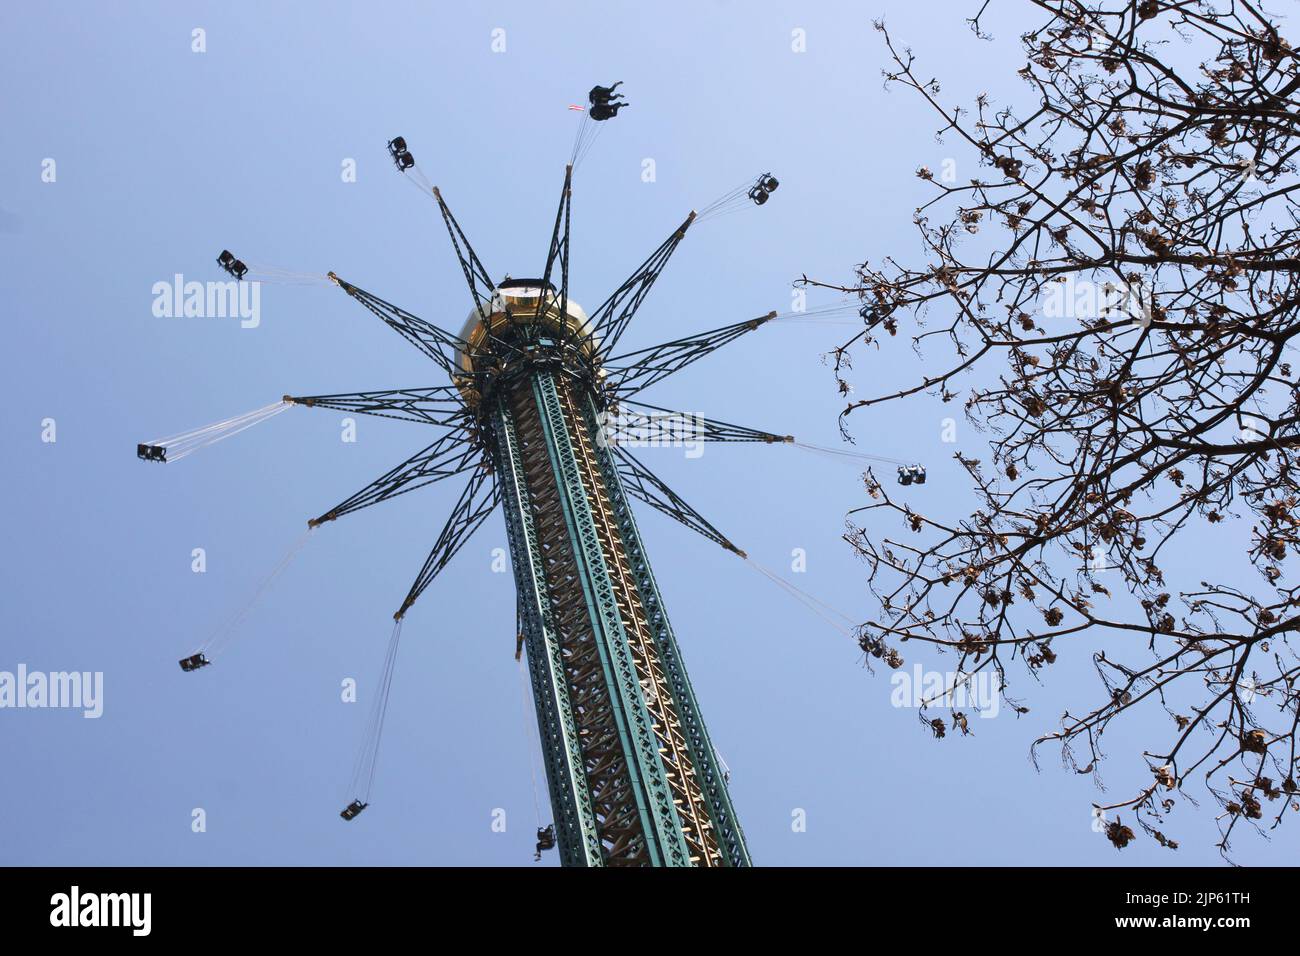 Vienna, Austria - 18 April 2012: Giant carrousel Prater Tower in the Wiener Prater. Breathtaking altitude flight Stock Photo